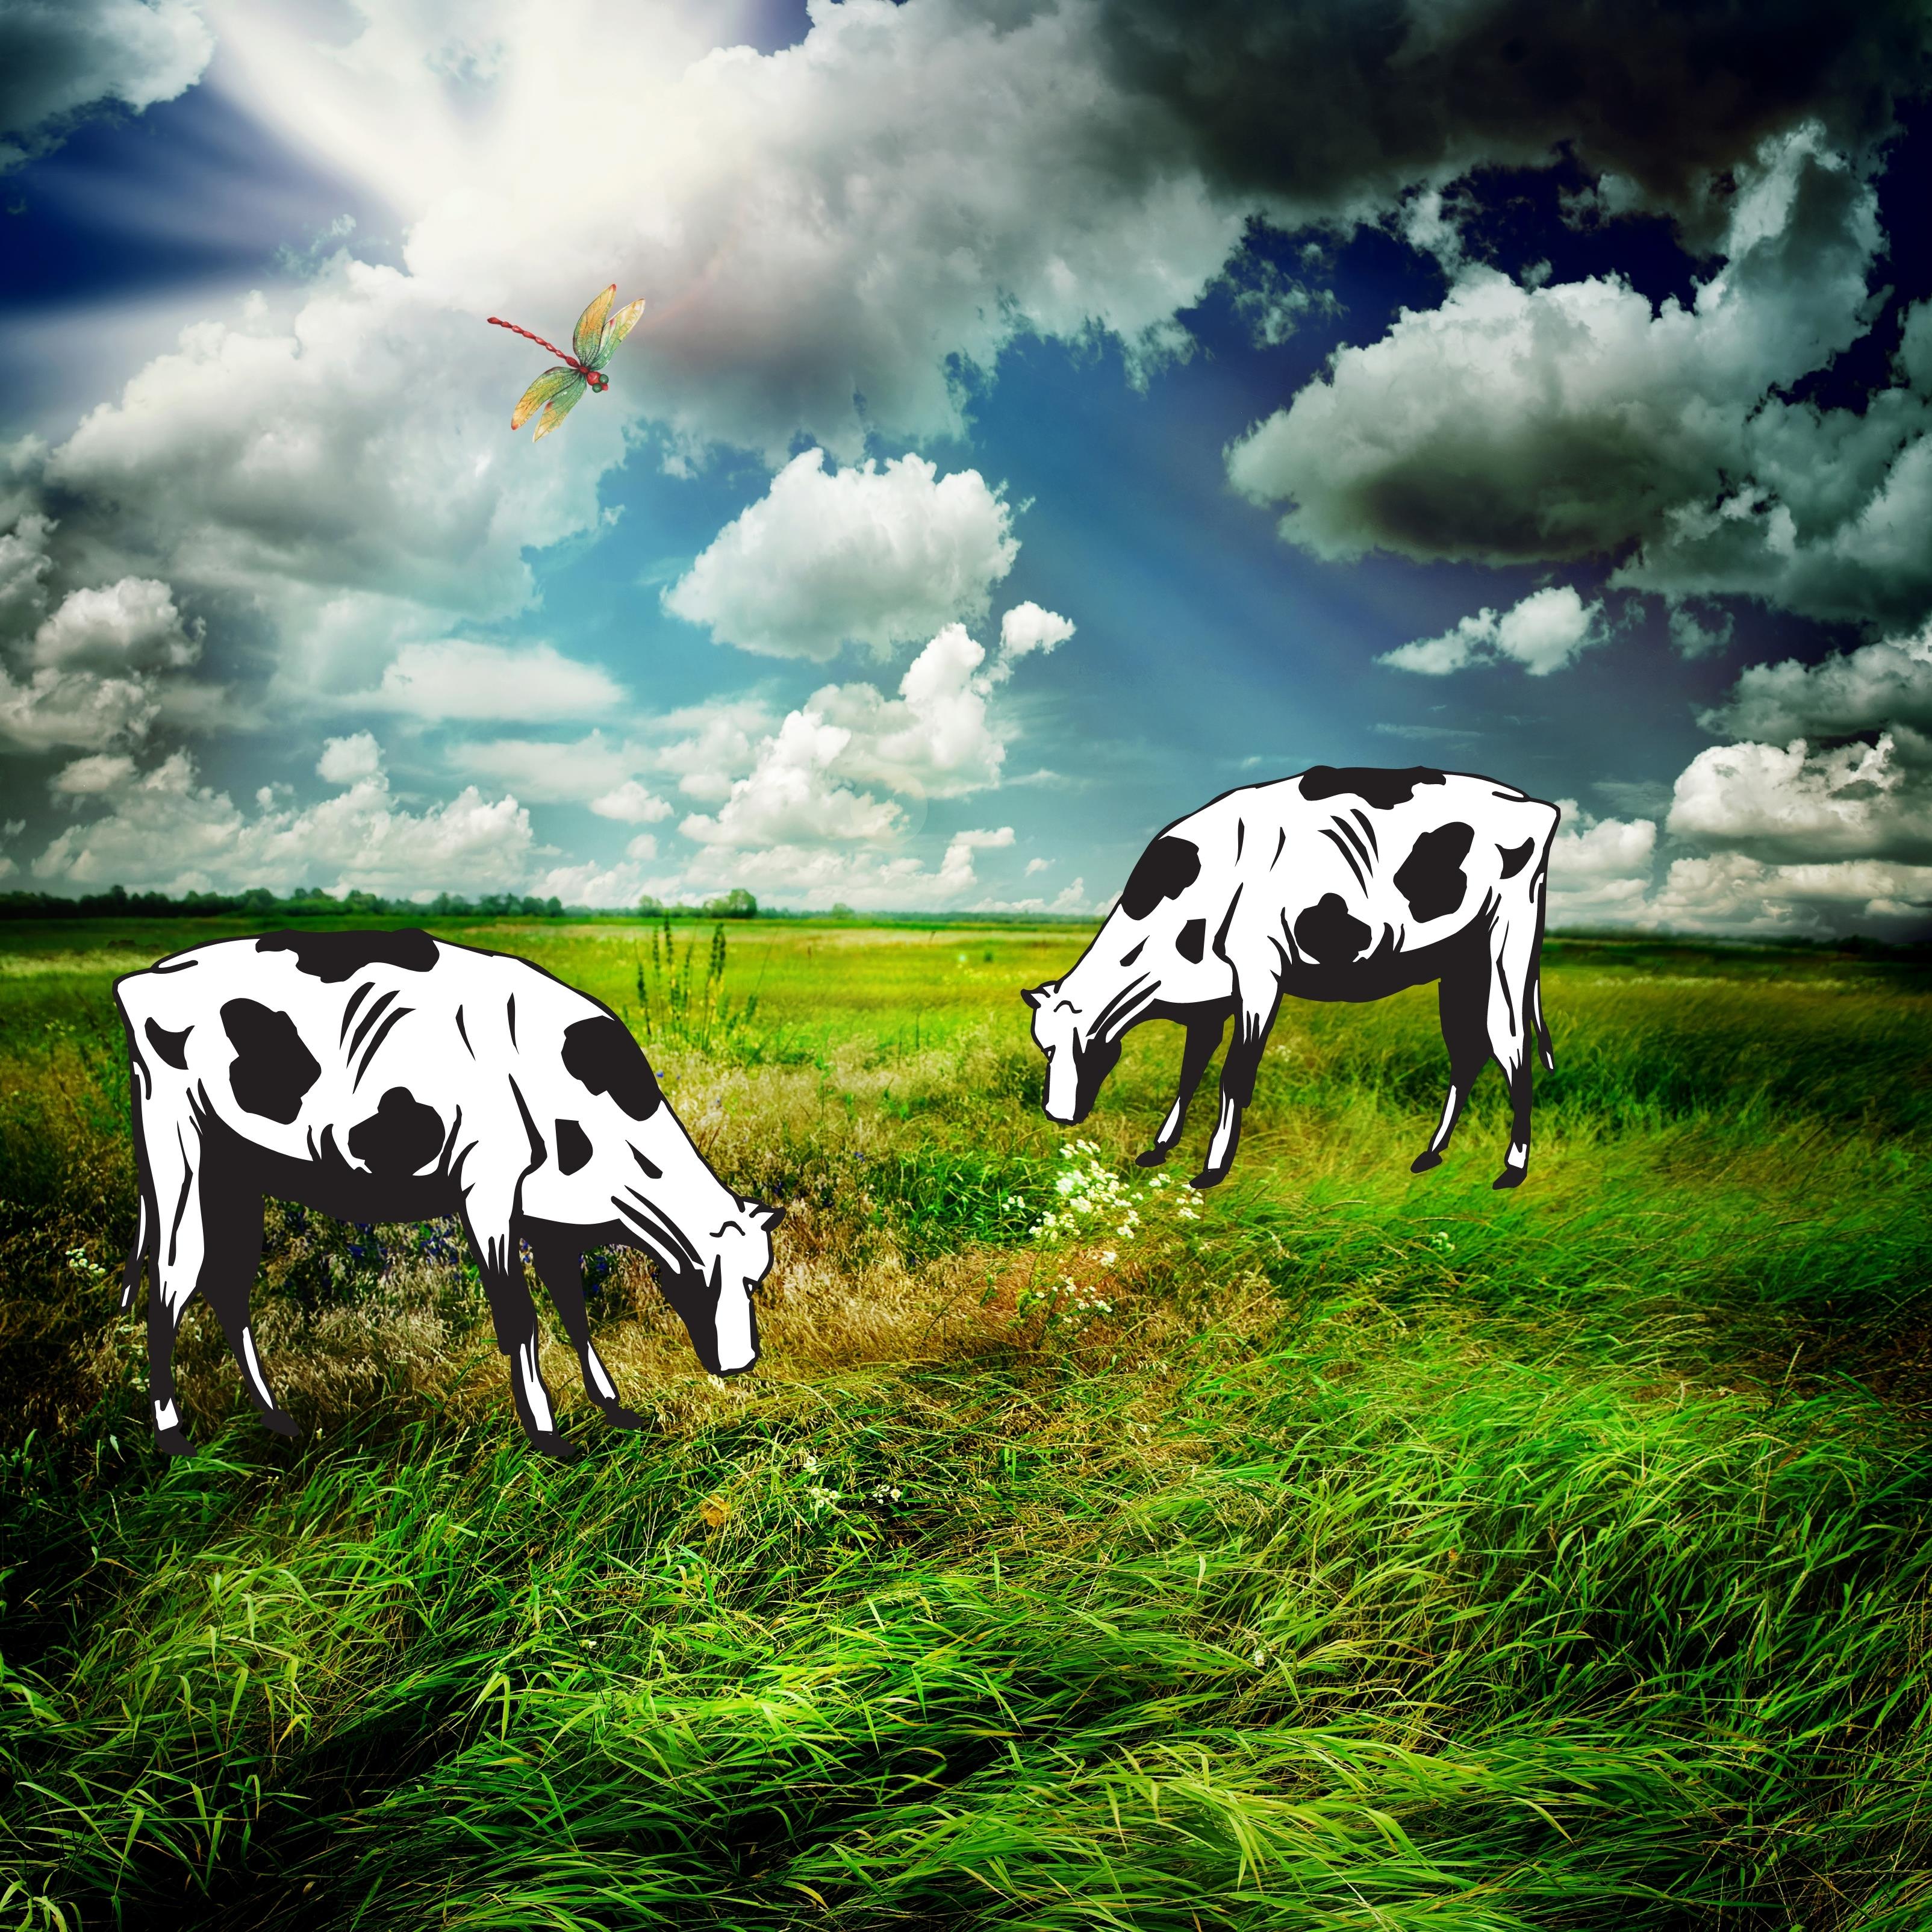 iPad Wallpapers Nature Grass Sky Clouds Cows iPad Wallpaper 3208x3208 px